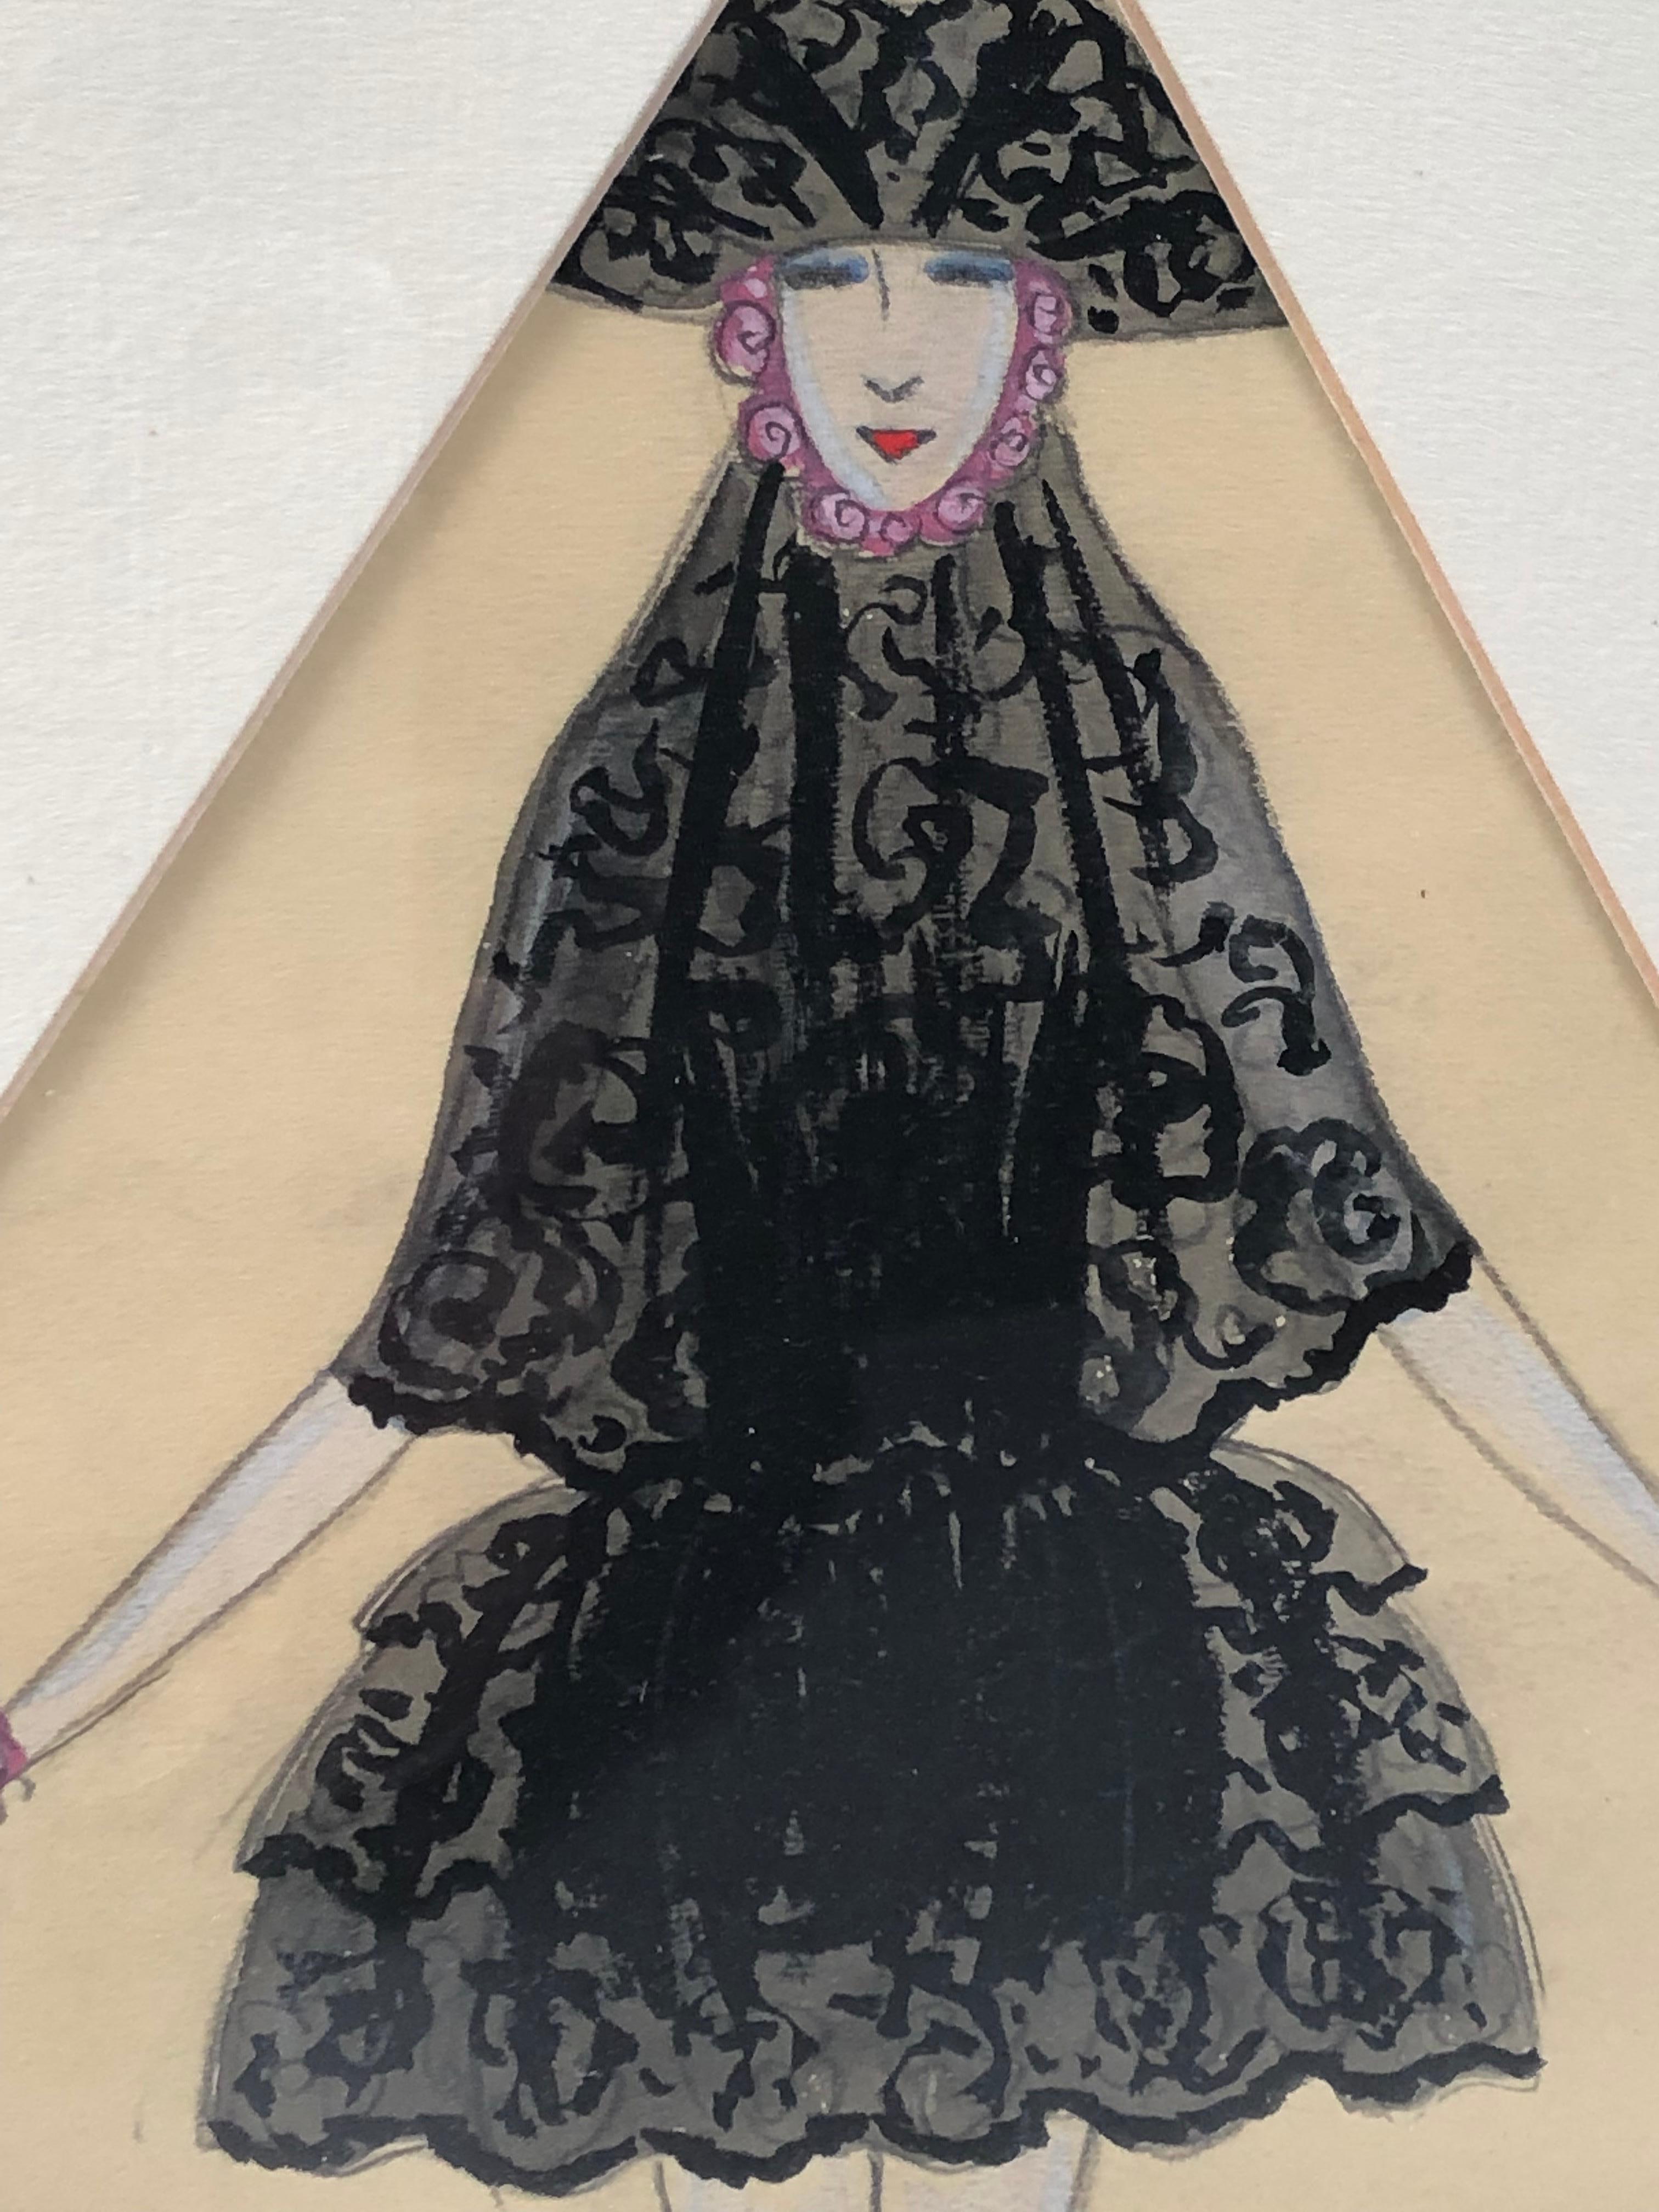 Paper Art Deco Period Fashion or Costume Drawing of a Venetian Woman